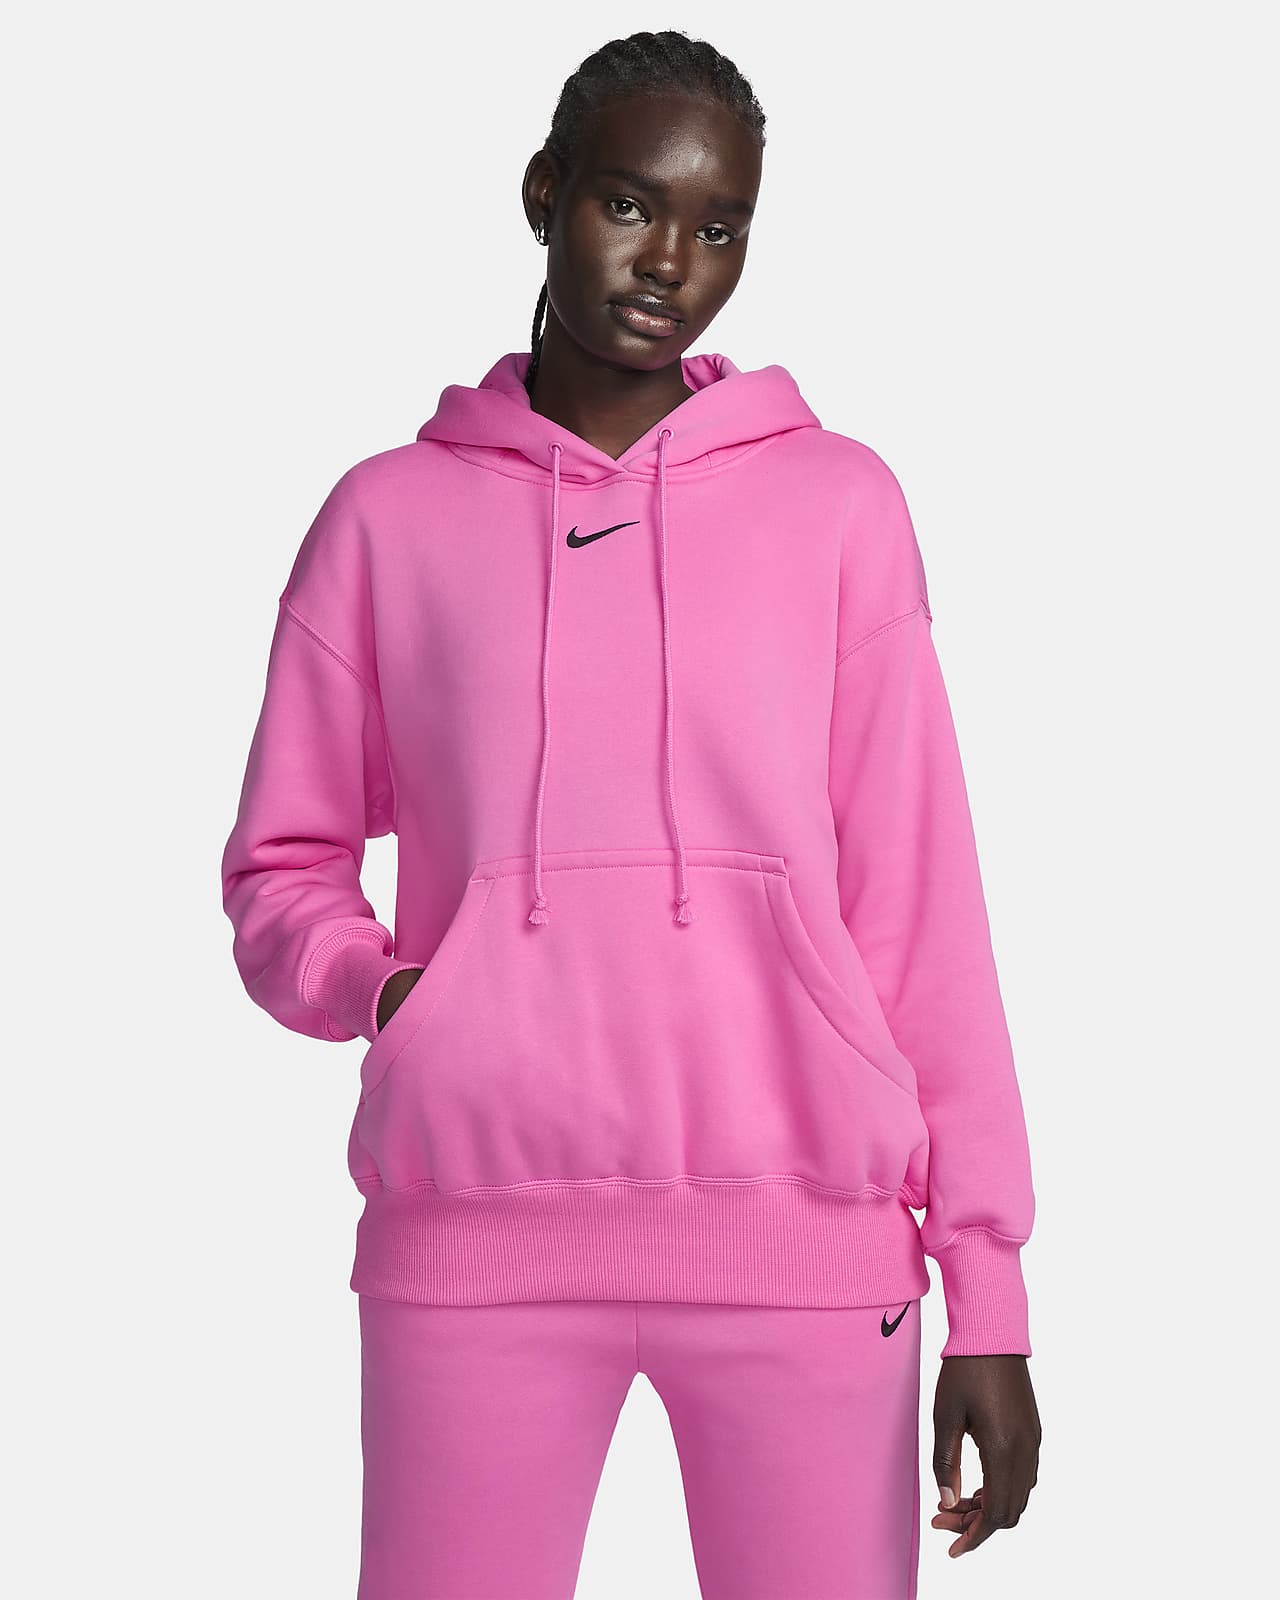 https://static.nike.com/a/images/t_PDP_1280_v1/f_auto,q_auto:eco/5e84d3f6-f98d-4df0-8948-c2f9e67e2004/sportswear-phoenix-fleece-oversized-pullover-hoodie-TD0kG3.png